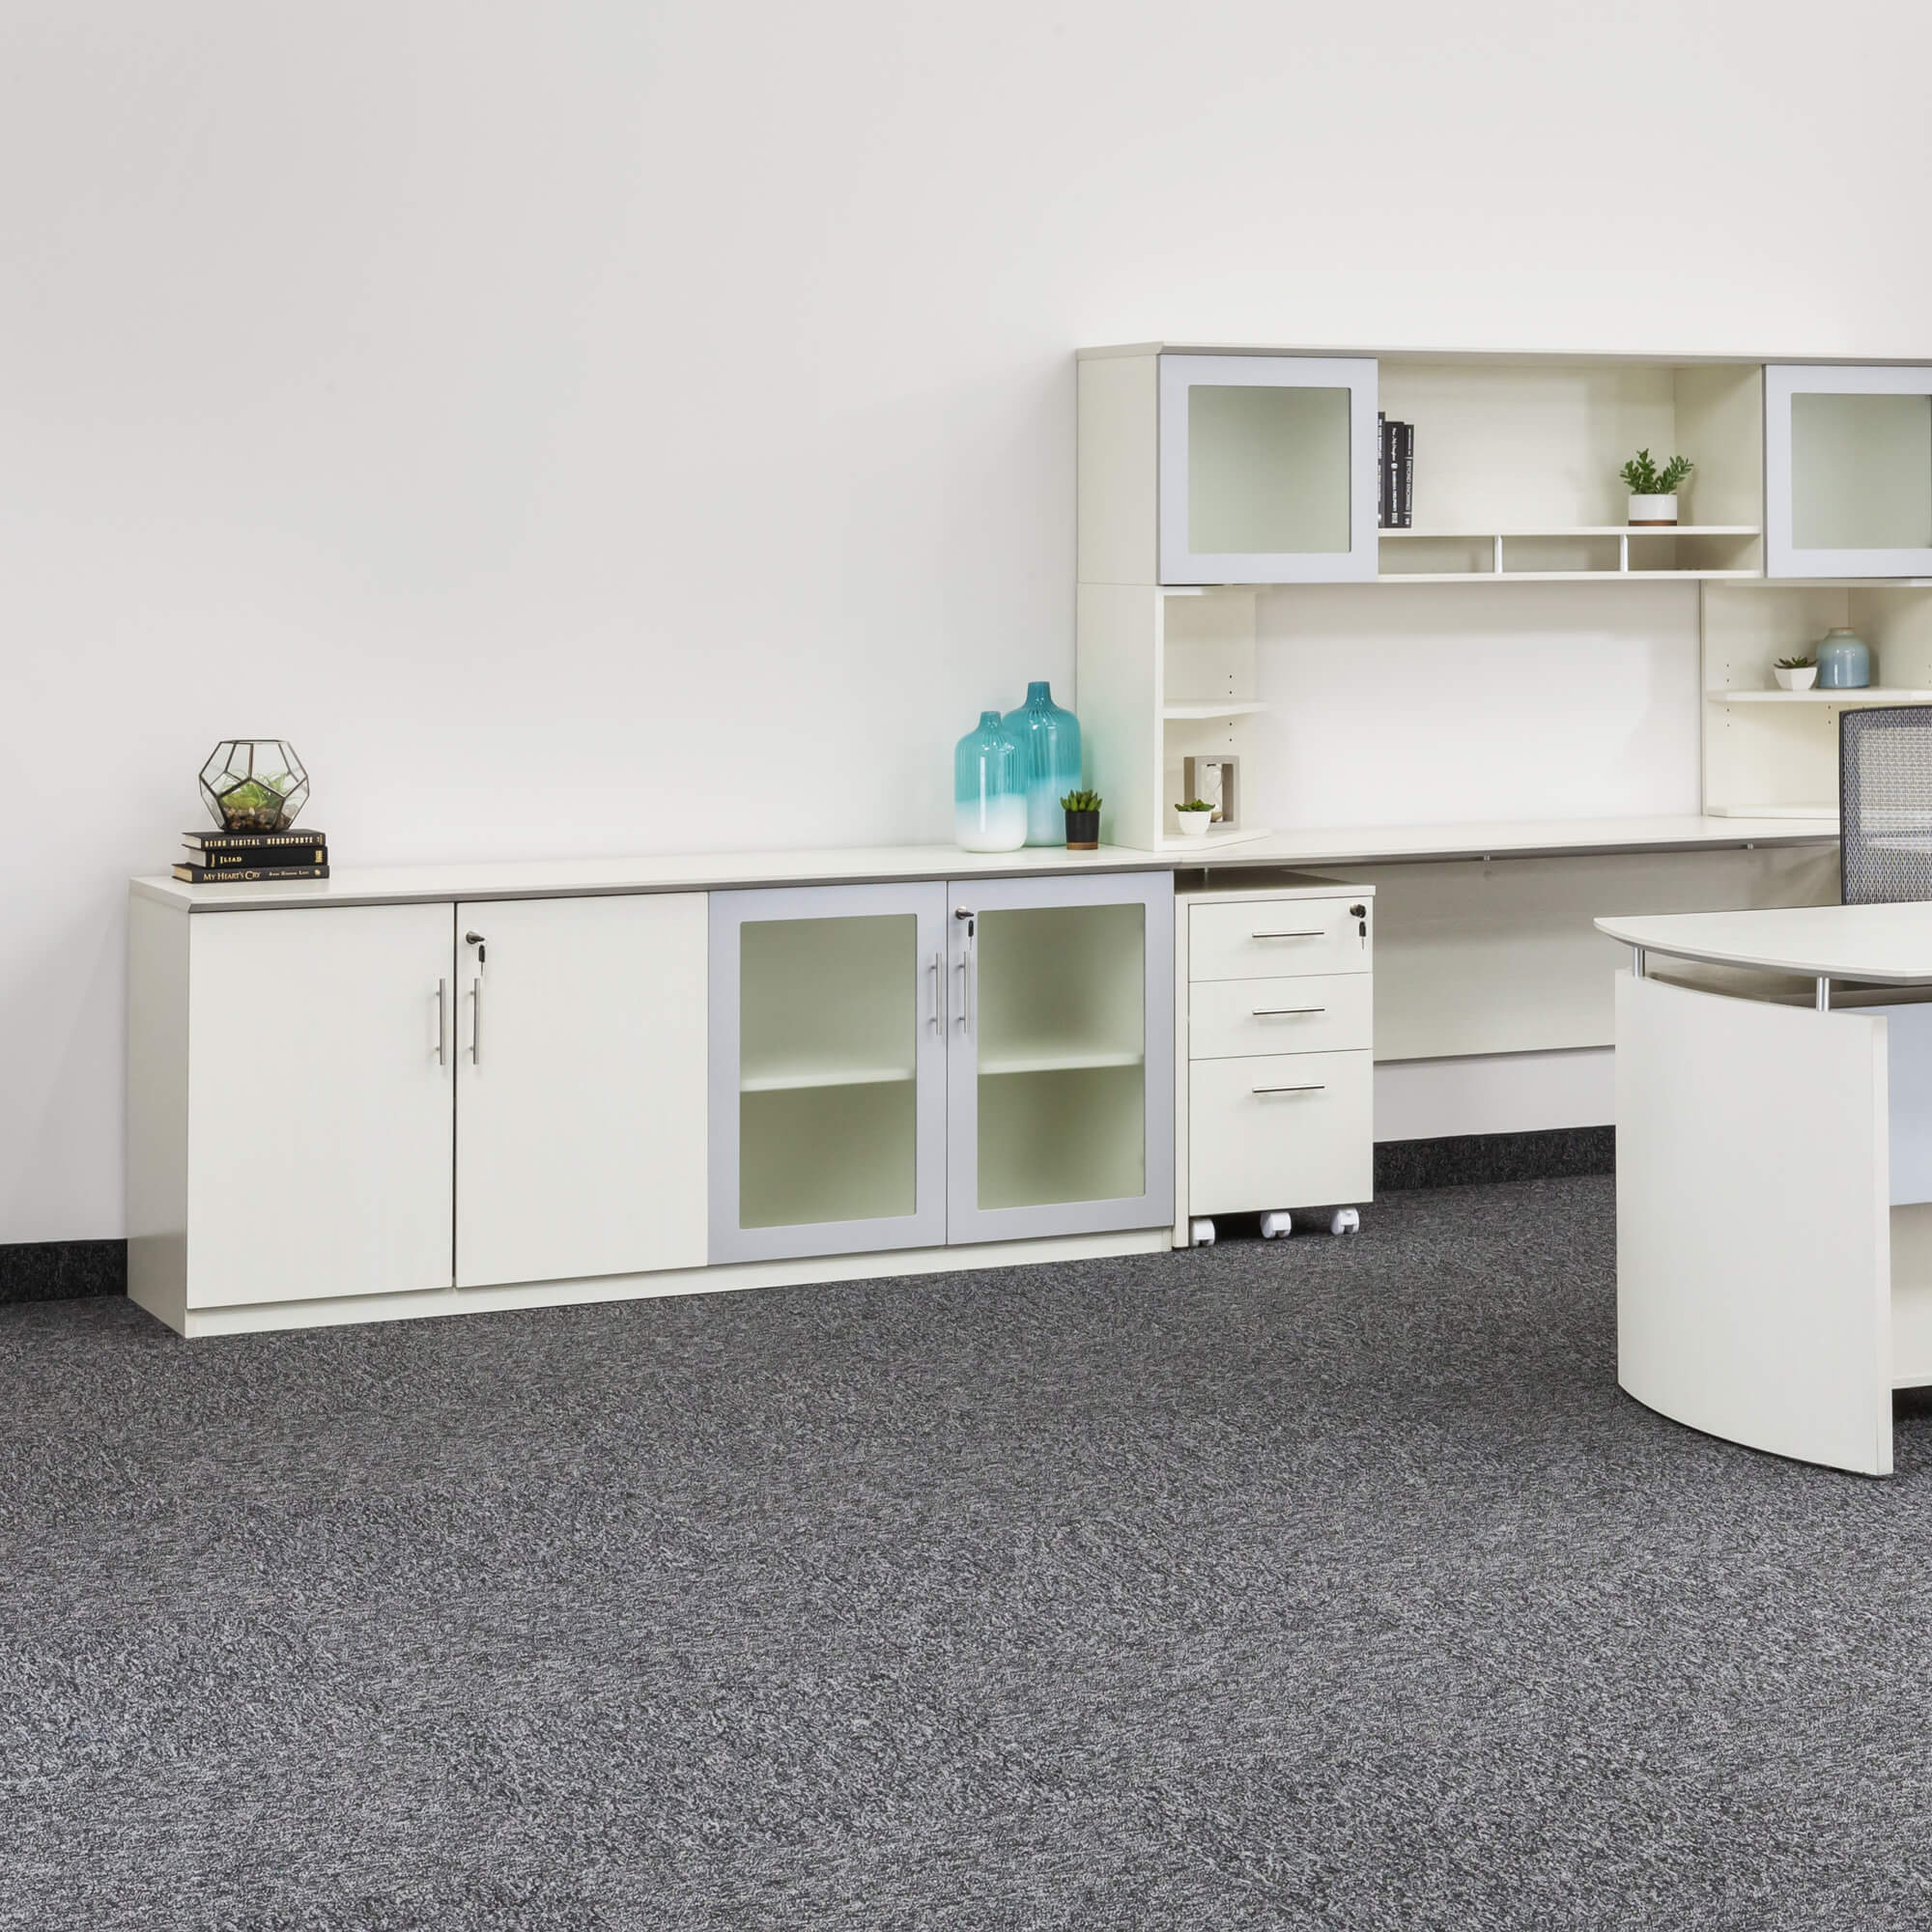 Conference room storage and accessories CUB MVLCTSS FAS lifestyle